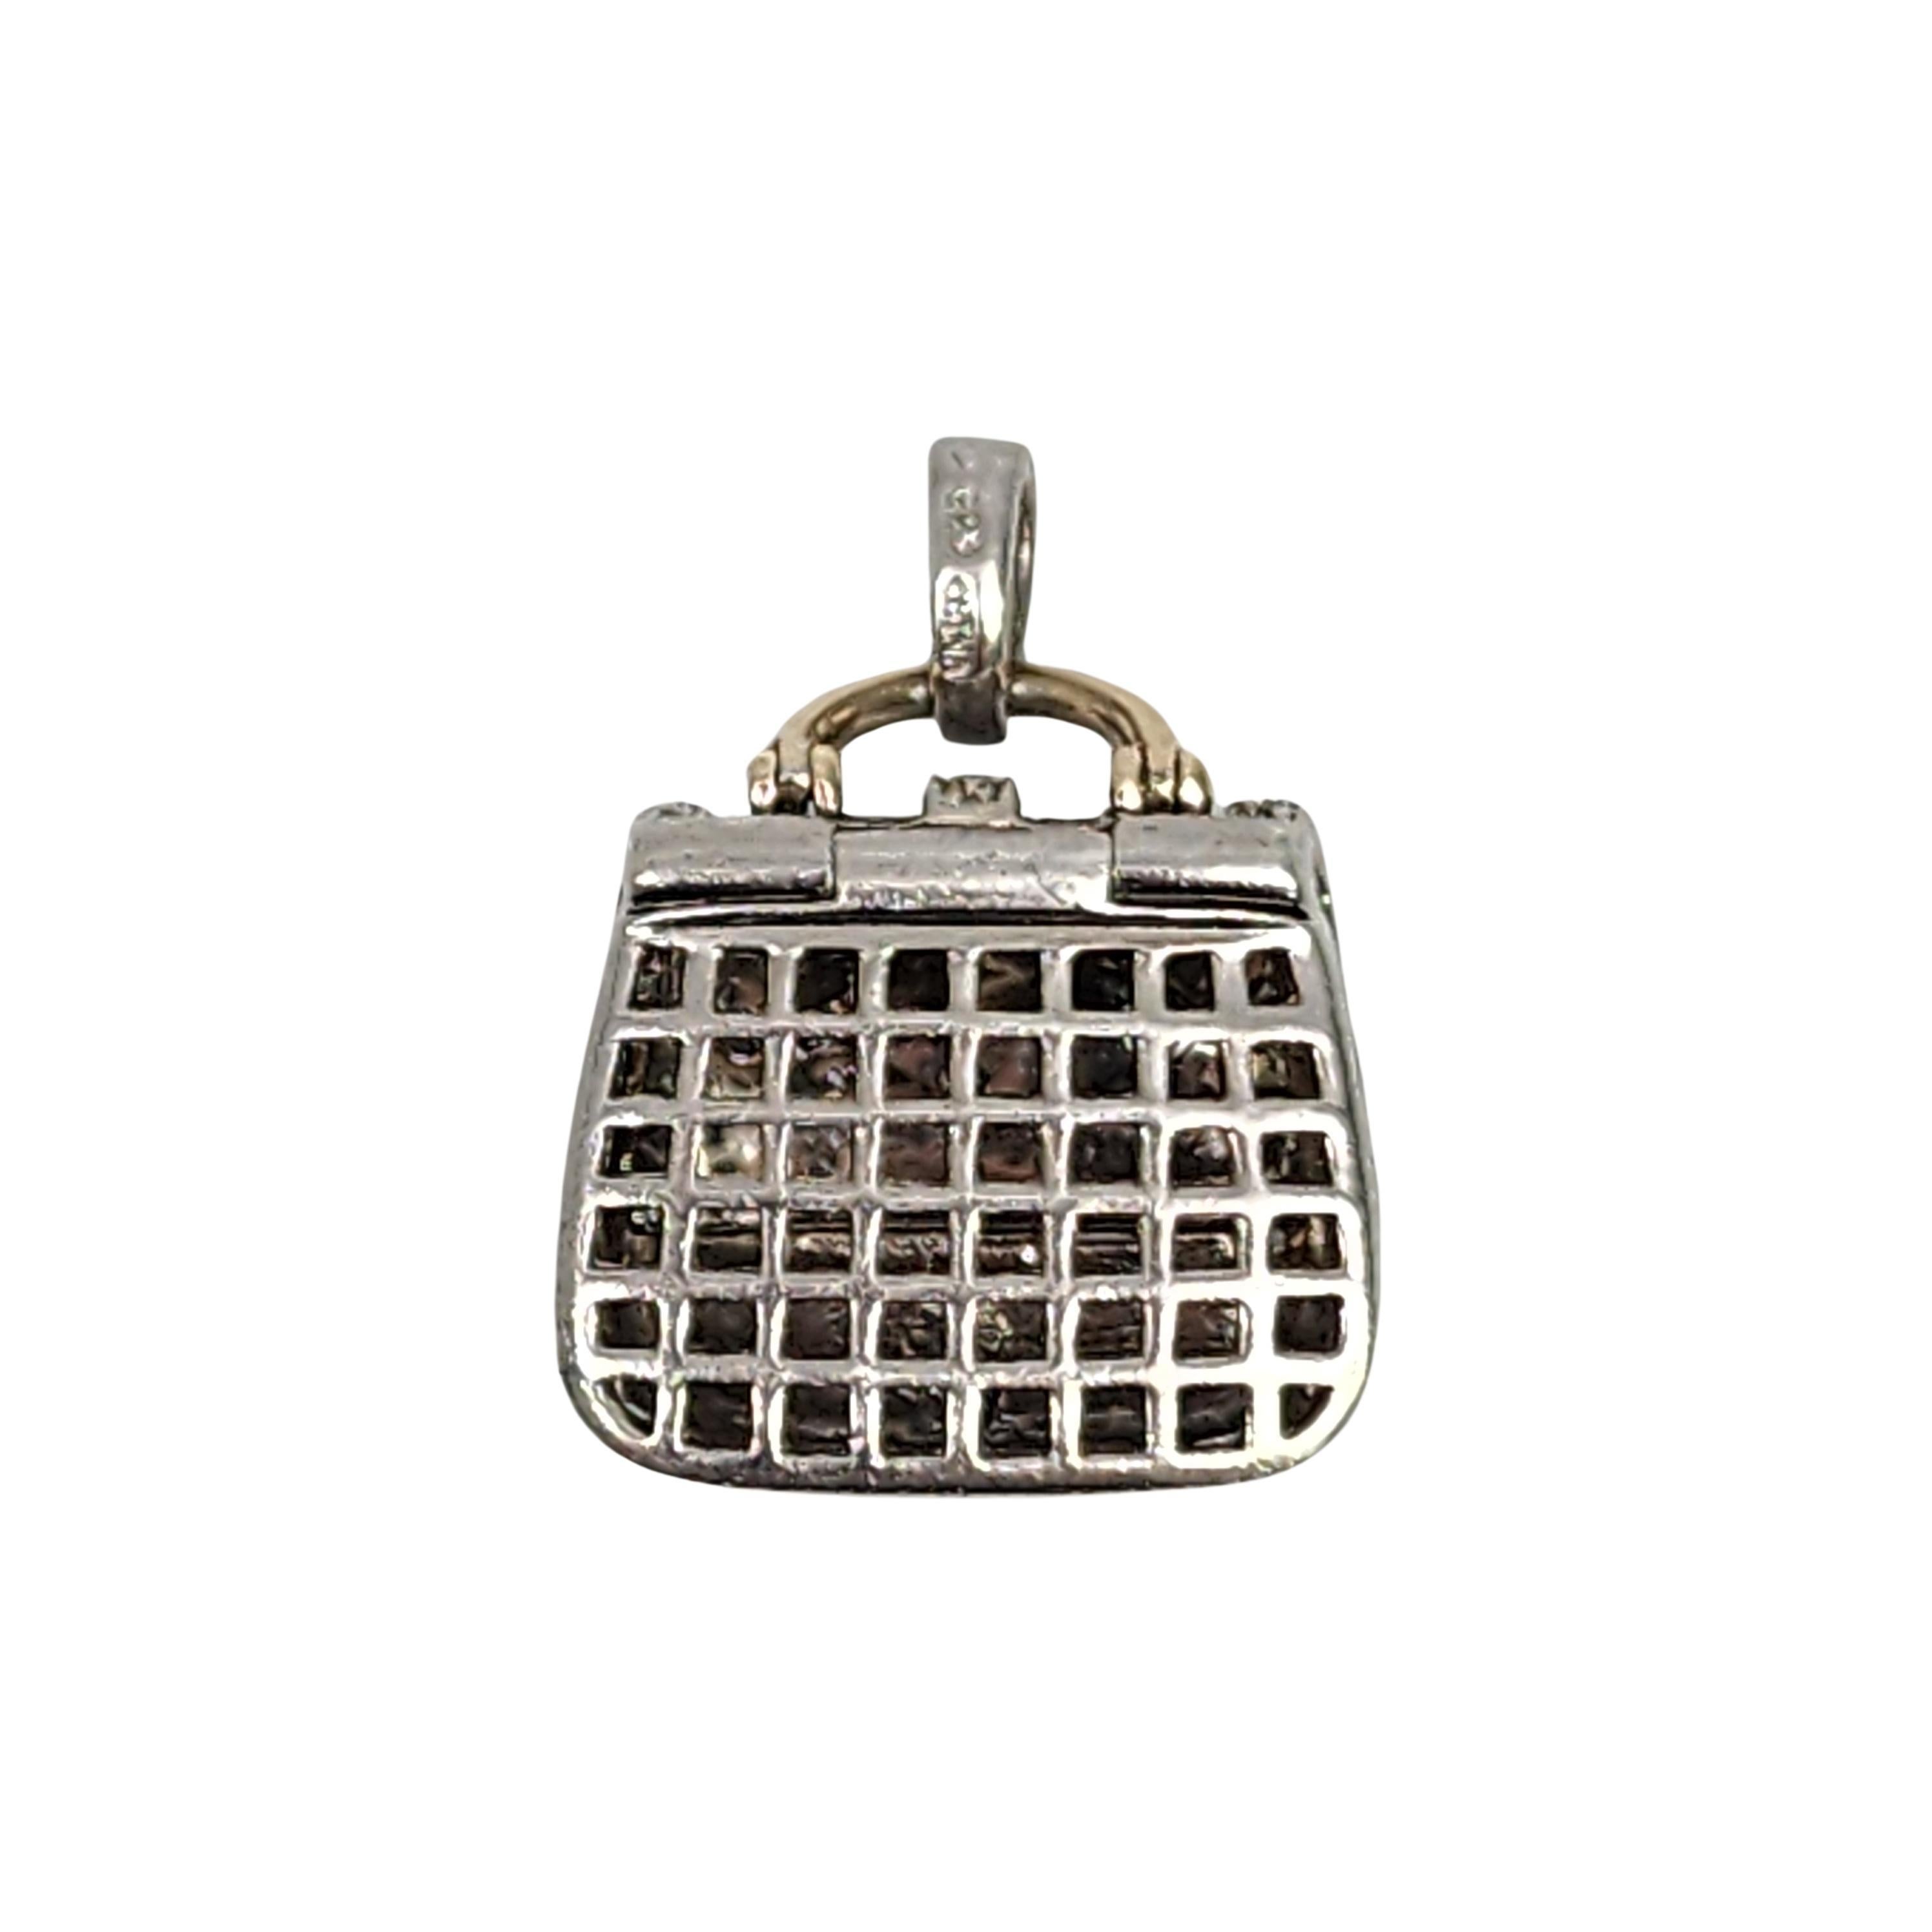 QVC's Affinity diamond sterling silver gold accent purse charm.

Sterling silver quilted design purse charm with gold accented handle and buckle with diamond accents. The front of the purse flap opens.

Weighs approx 10.6g, 6.8dwt

Measures approx 1